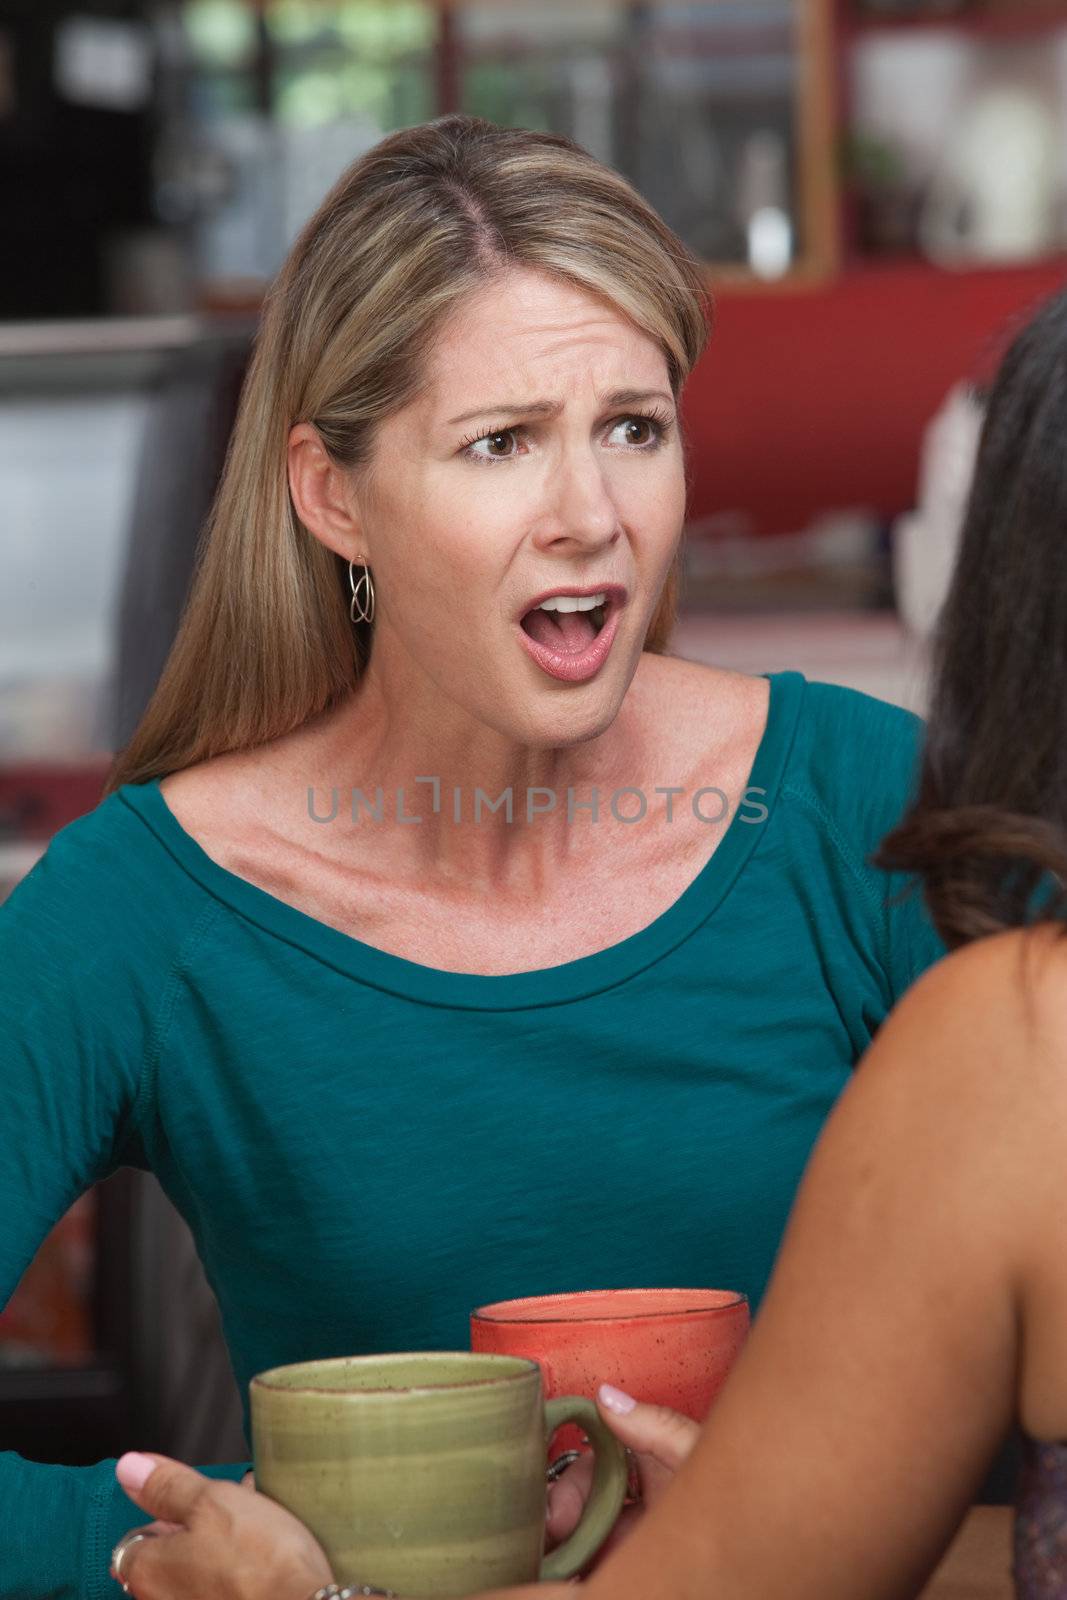 Insulted Caucasian woman across from friend in restaurant